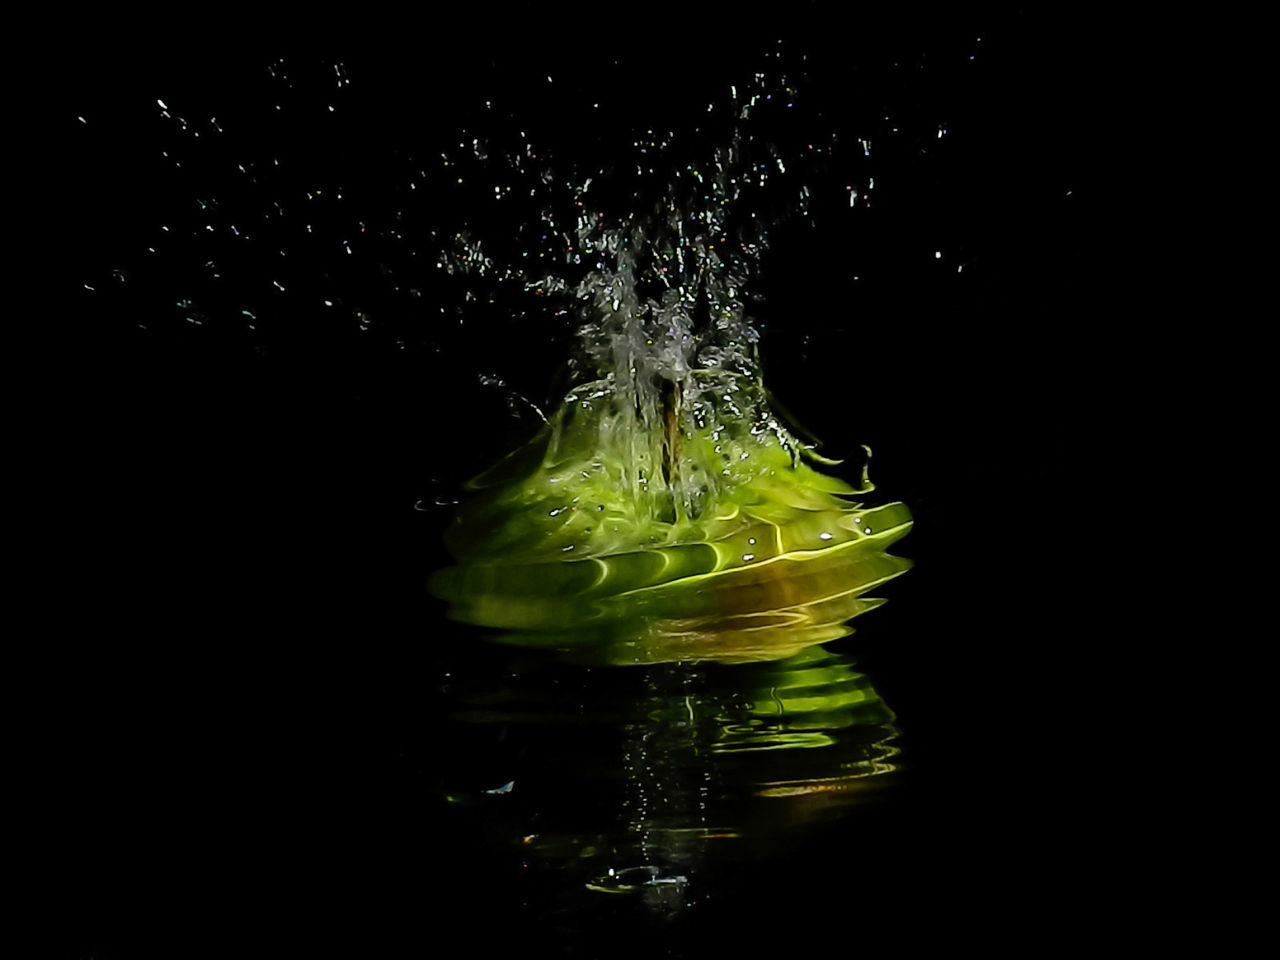 black background, splashing, studio shot, motion, water, food and drink, freshness, indoors, yellow, green, impact, darkness, no people, food, night, healthy eating, drop, refreshment, nature, wellbeing, reflection, light, drink, close-up, falling, macro photography, copy space, leaf